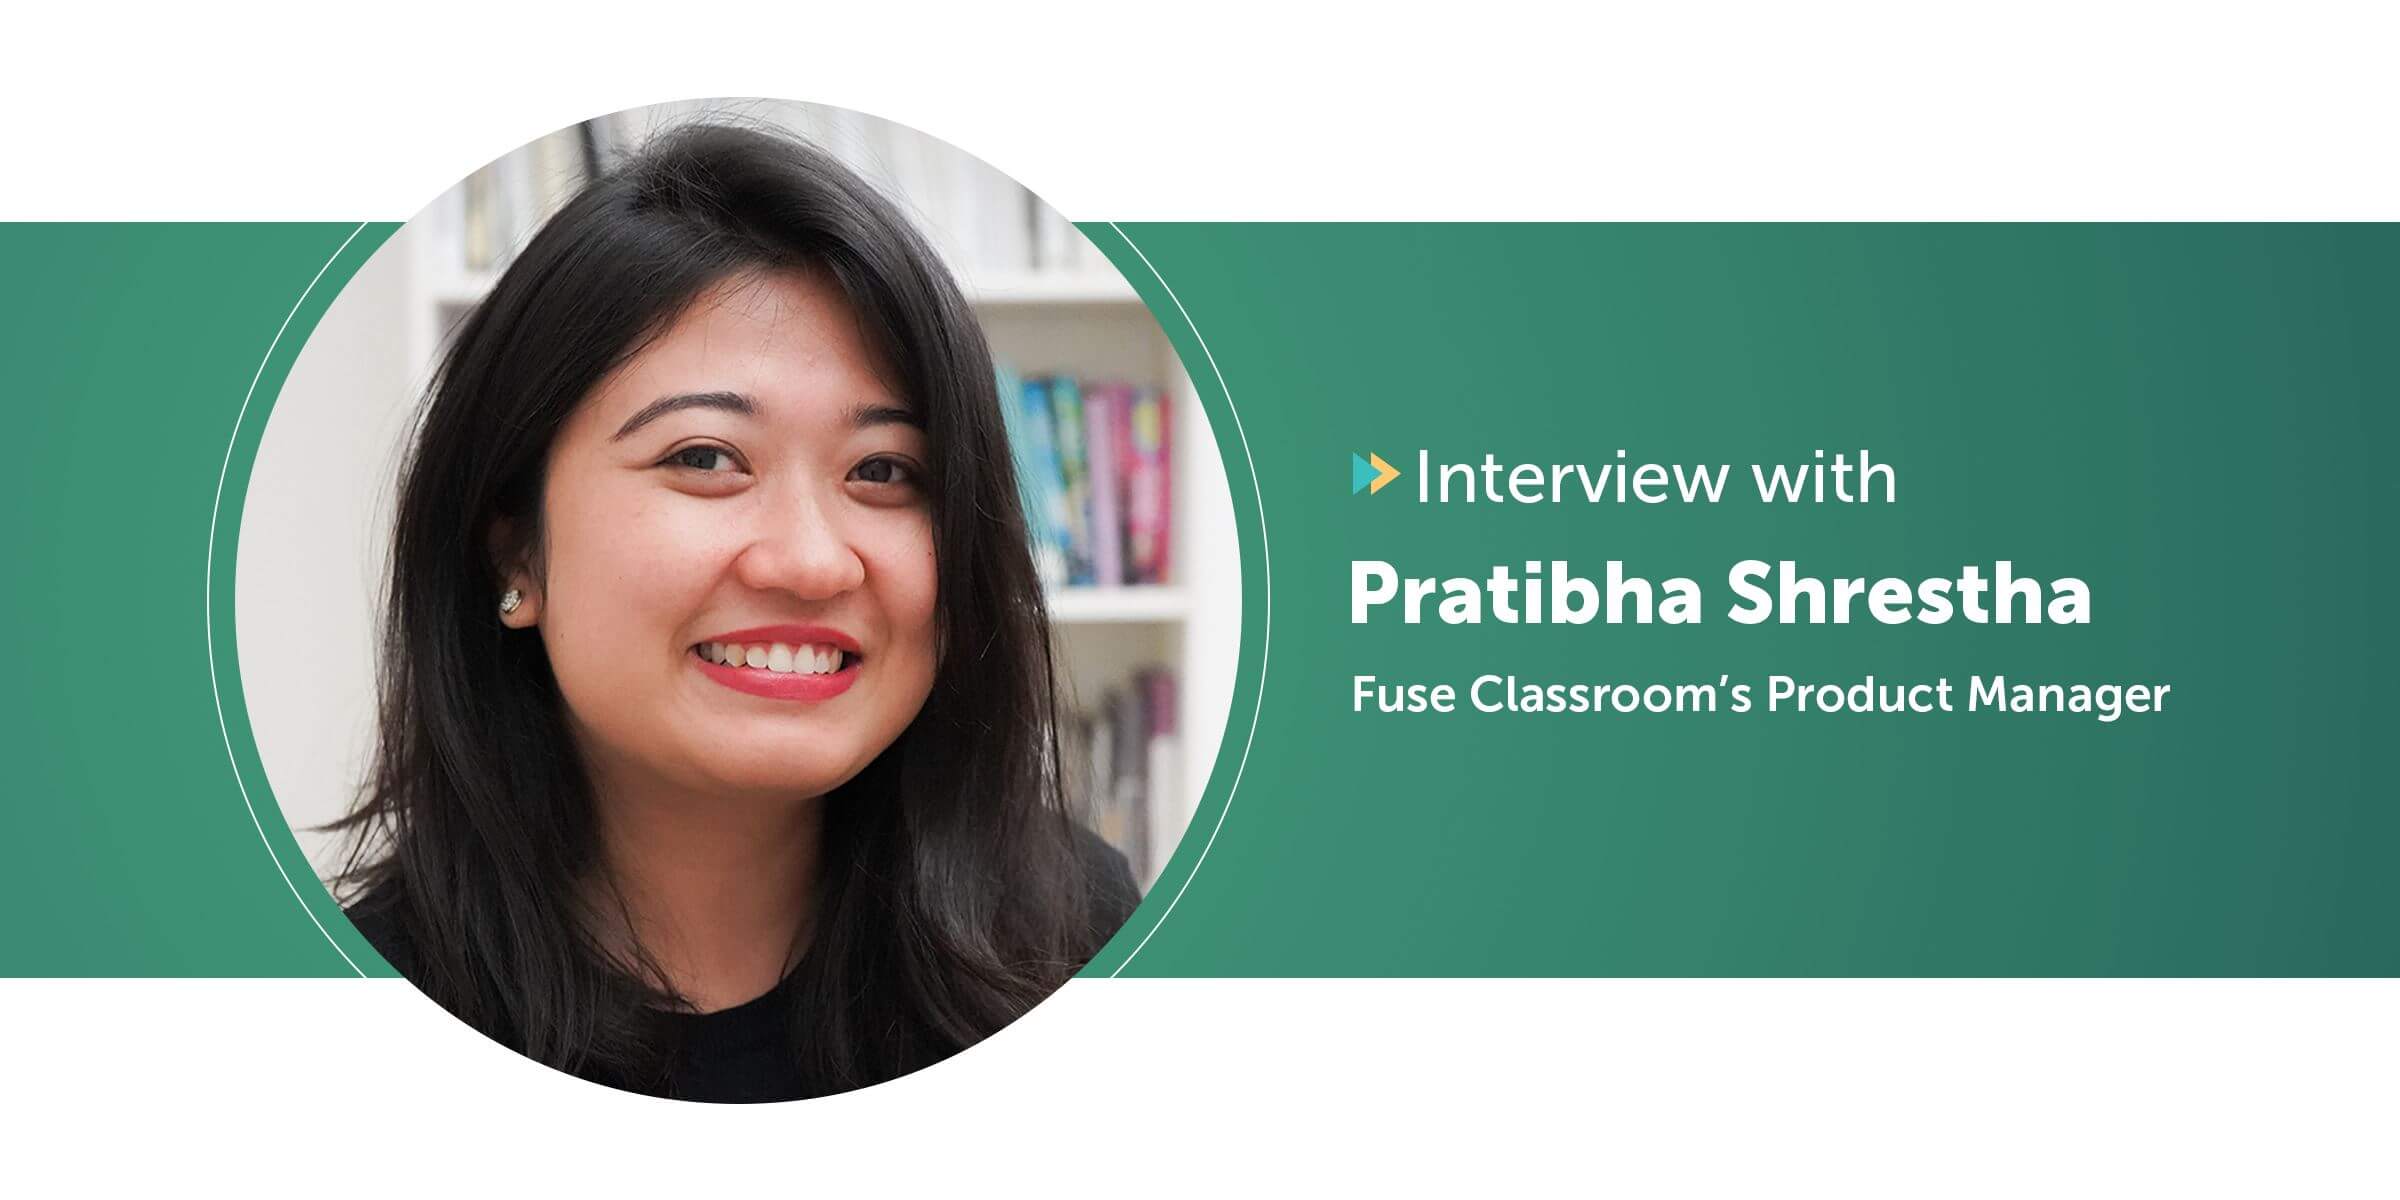 Interview with Fuse Classroom’s Product Manager, Pratibha Shrestha